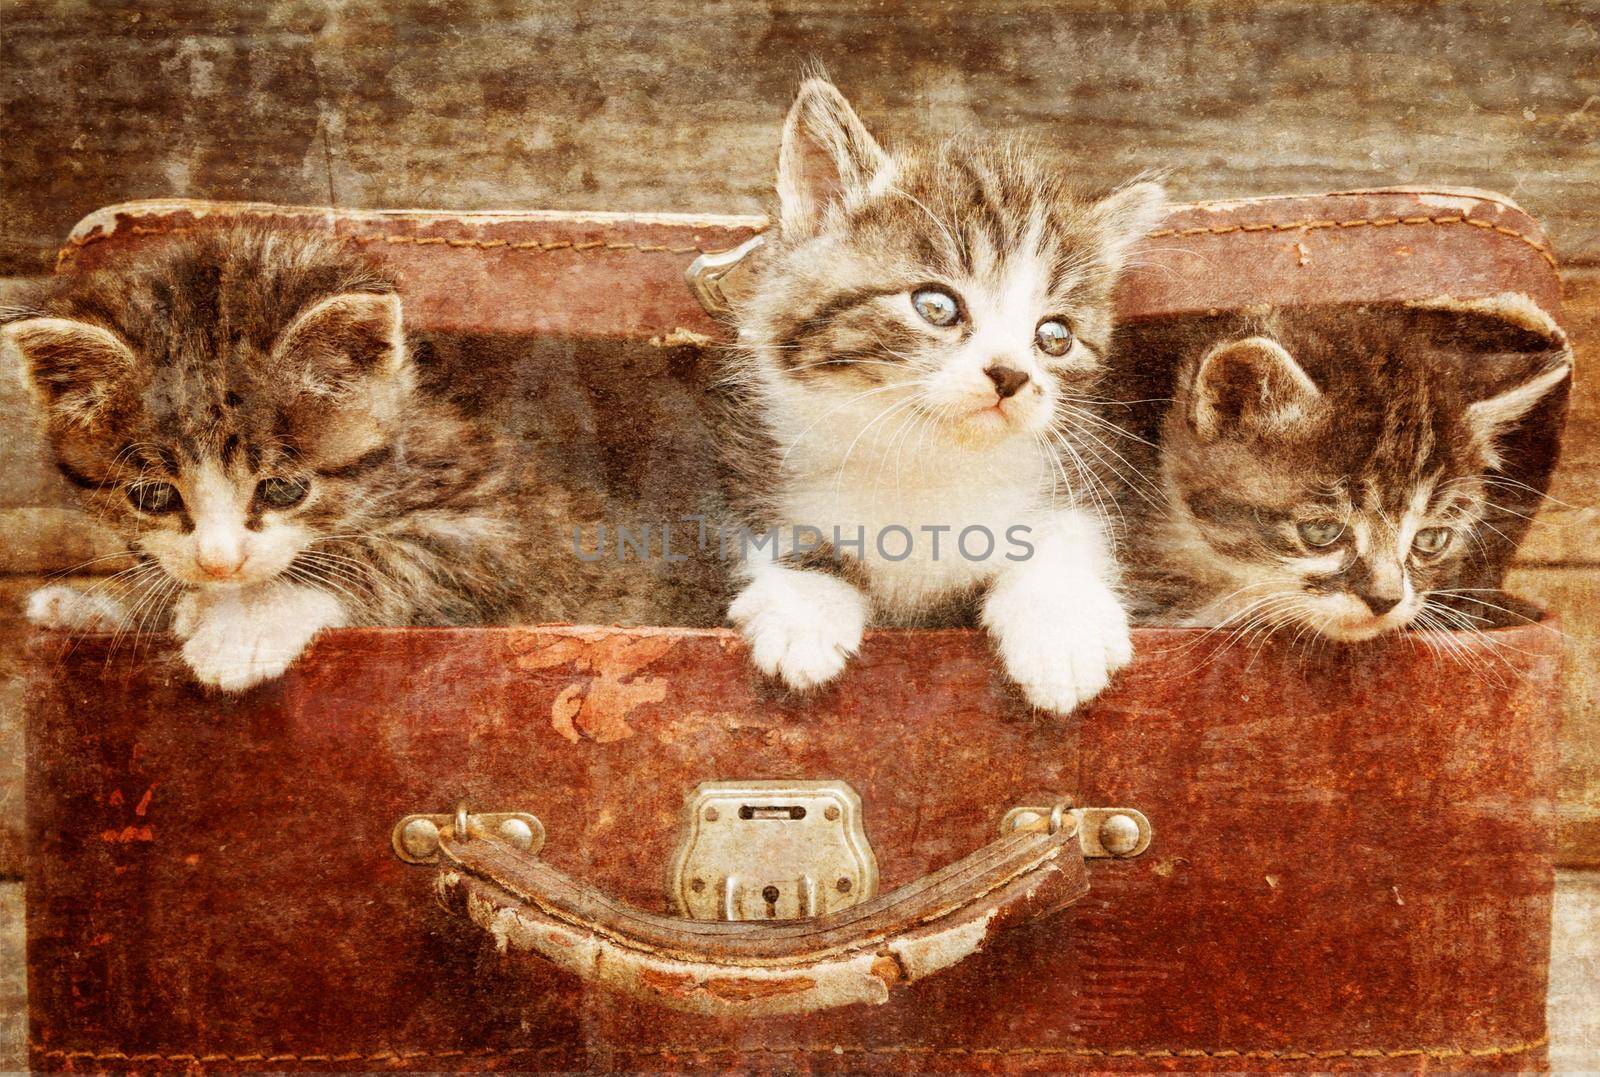 Curiosity kittens in vintage suitcase on a wooden background. Vintage image